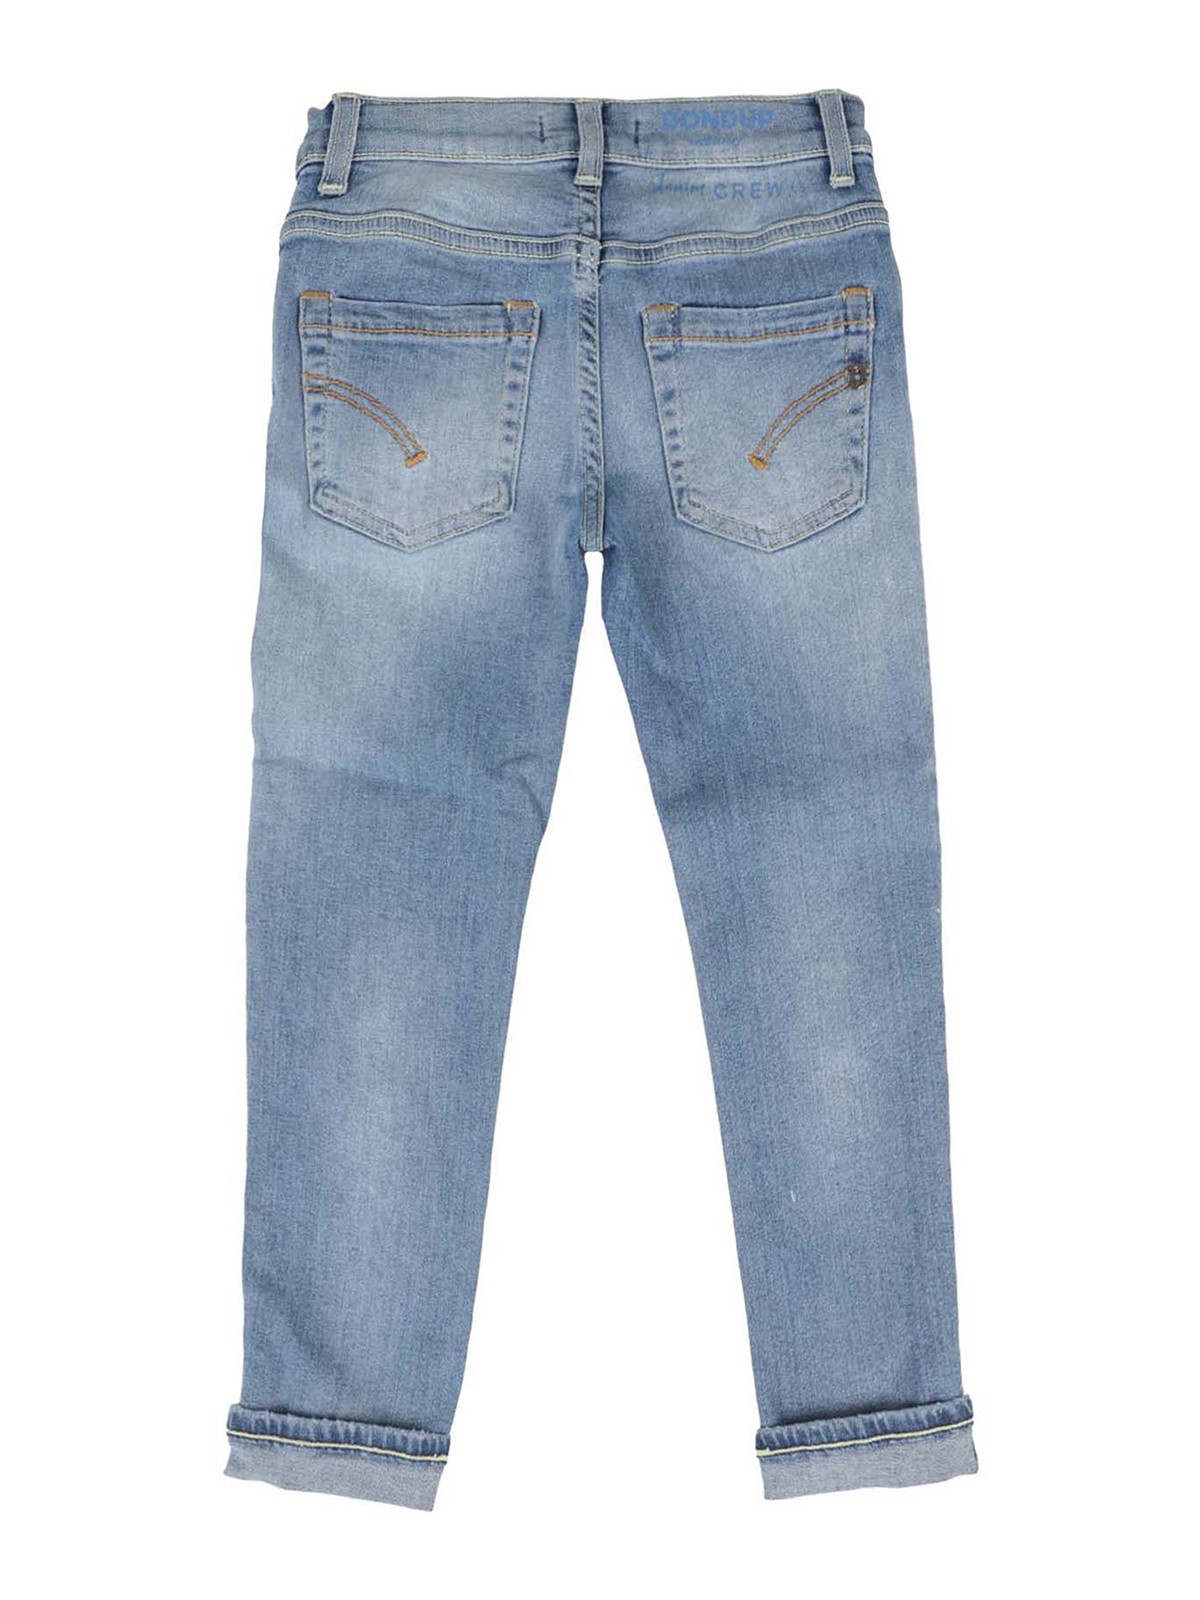 DONDUP GEORGE DISTRESSED EFFECT JEANS